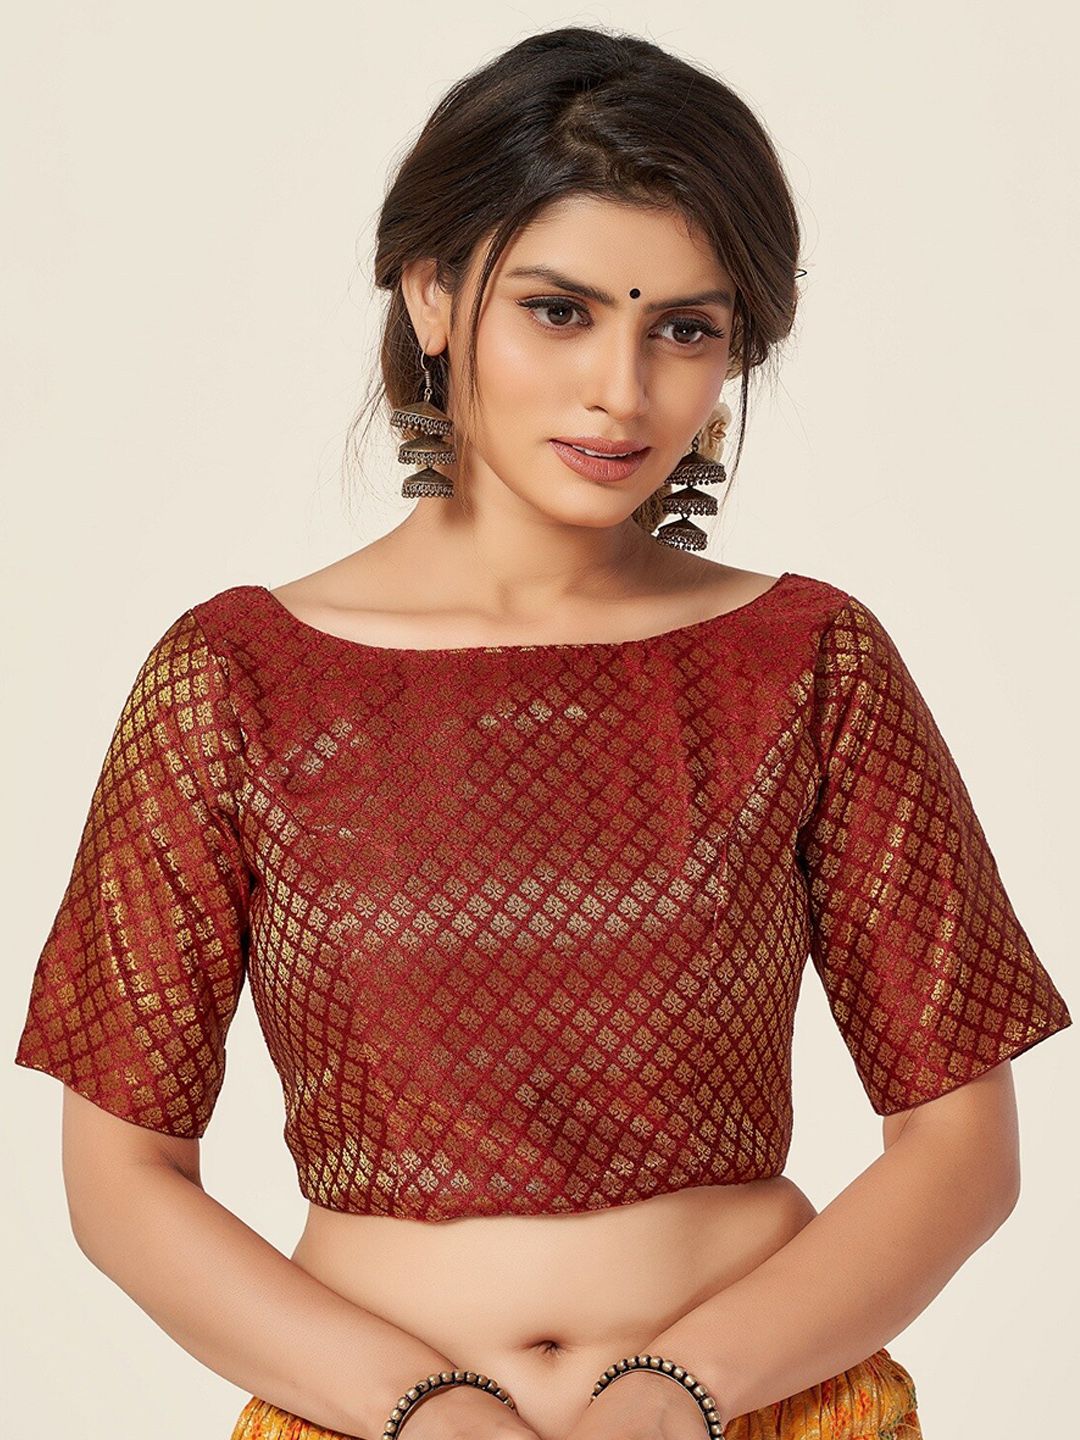 HIMRISE Maroon Woven Design Saree Blouse Price in India